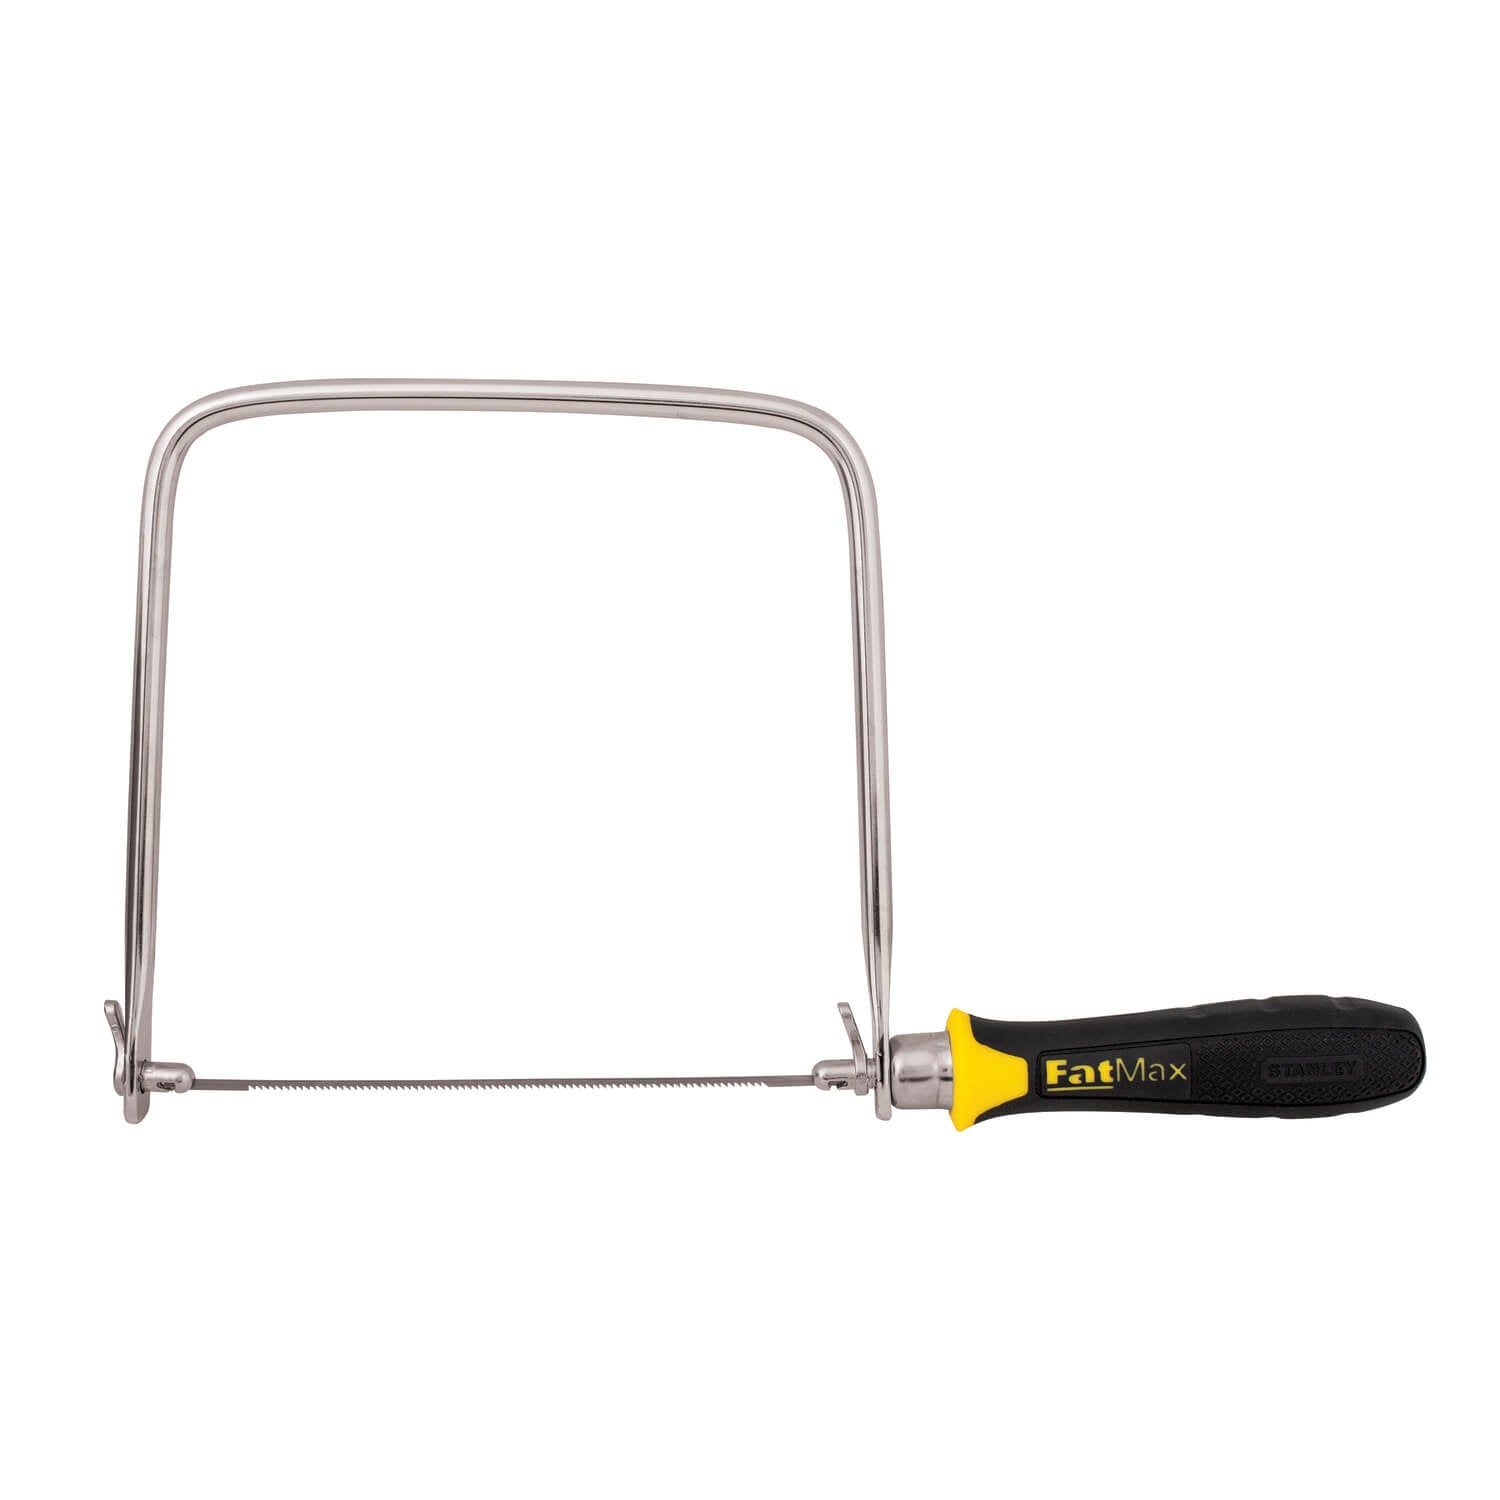 STANELY  15-106  -  6-3/4 IN FATMAX® COPING SAW - wise-line-tools